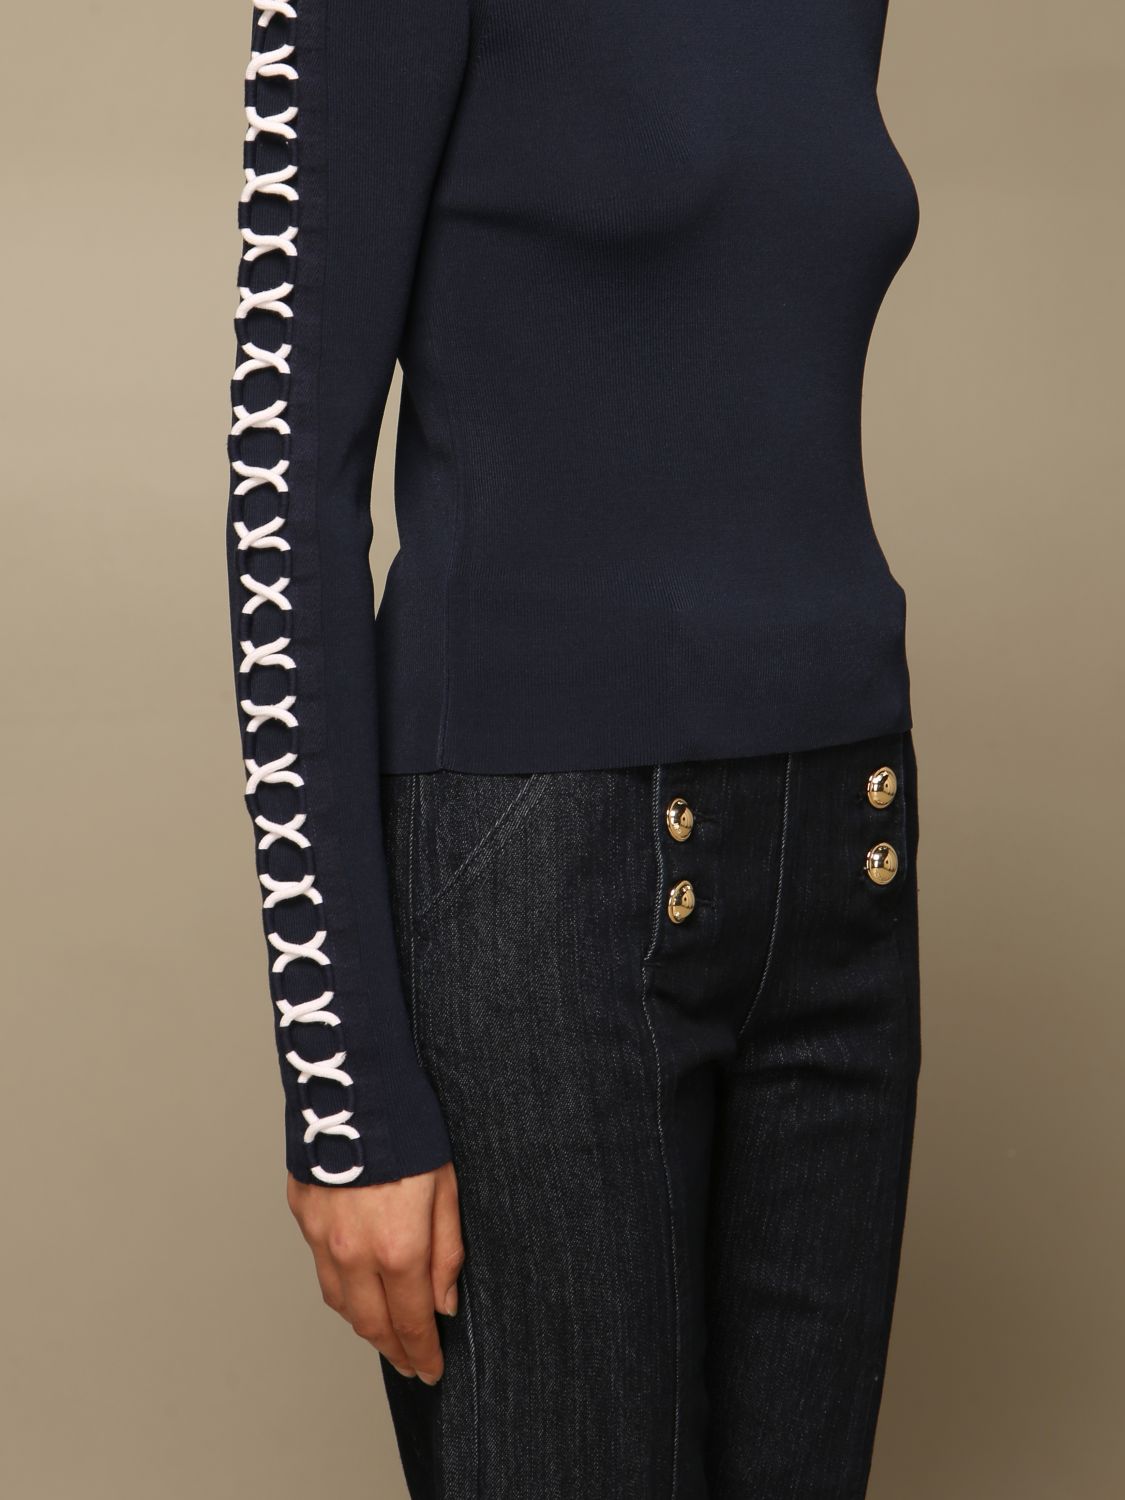 MICHAEL MICHAEL KORS: sweater with criss cross | Sweater Michael Michael Kors Women Blue | Sweater Michael Kors MS1600WBVC GIGLIO.COM